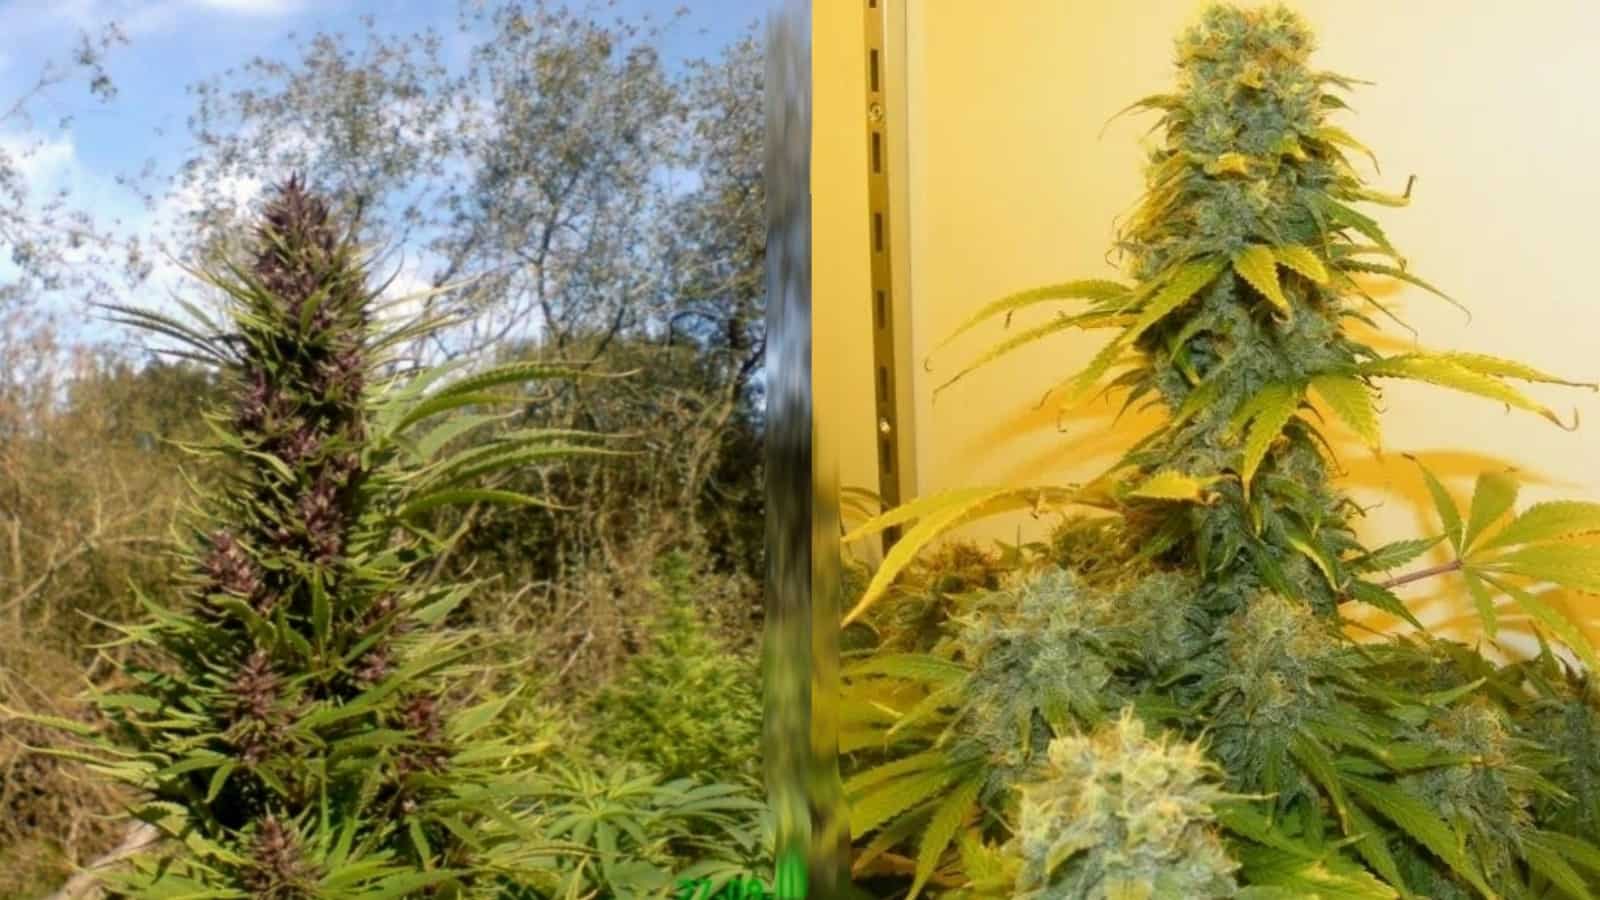 Bush VS Hydro: The Difference Between Growing Hydro and Bush Weed